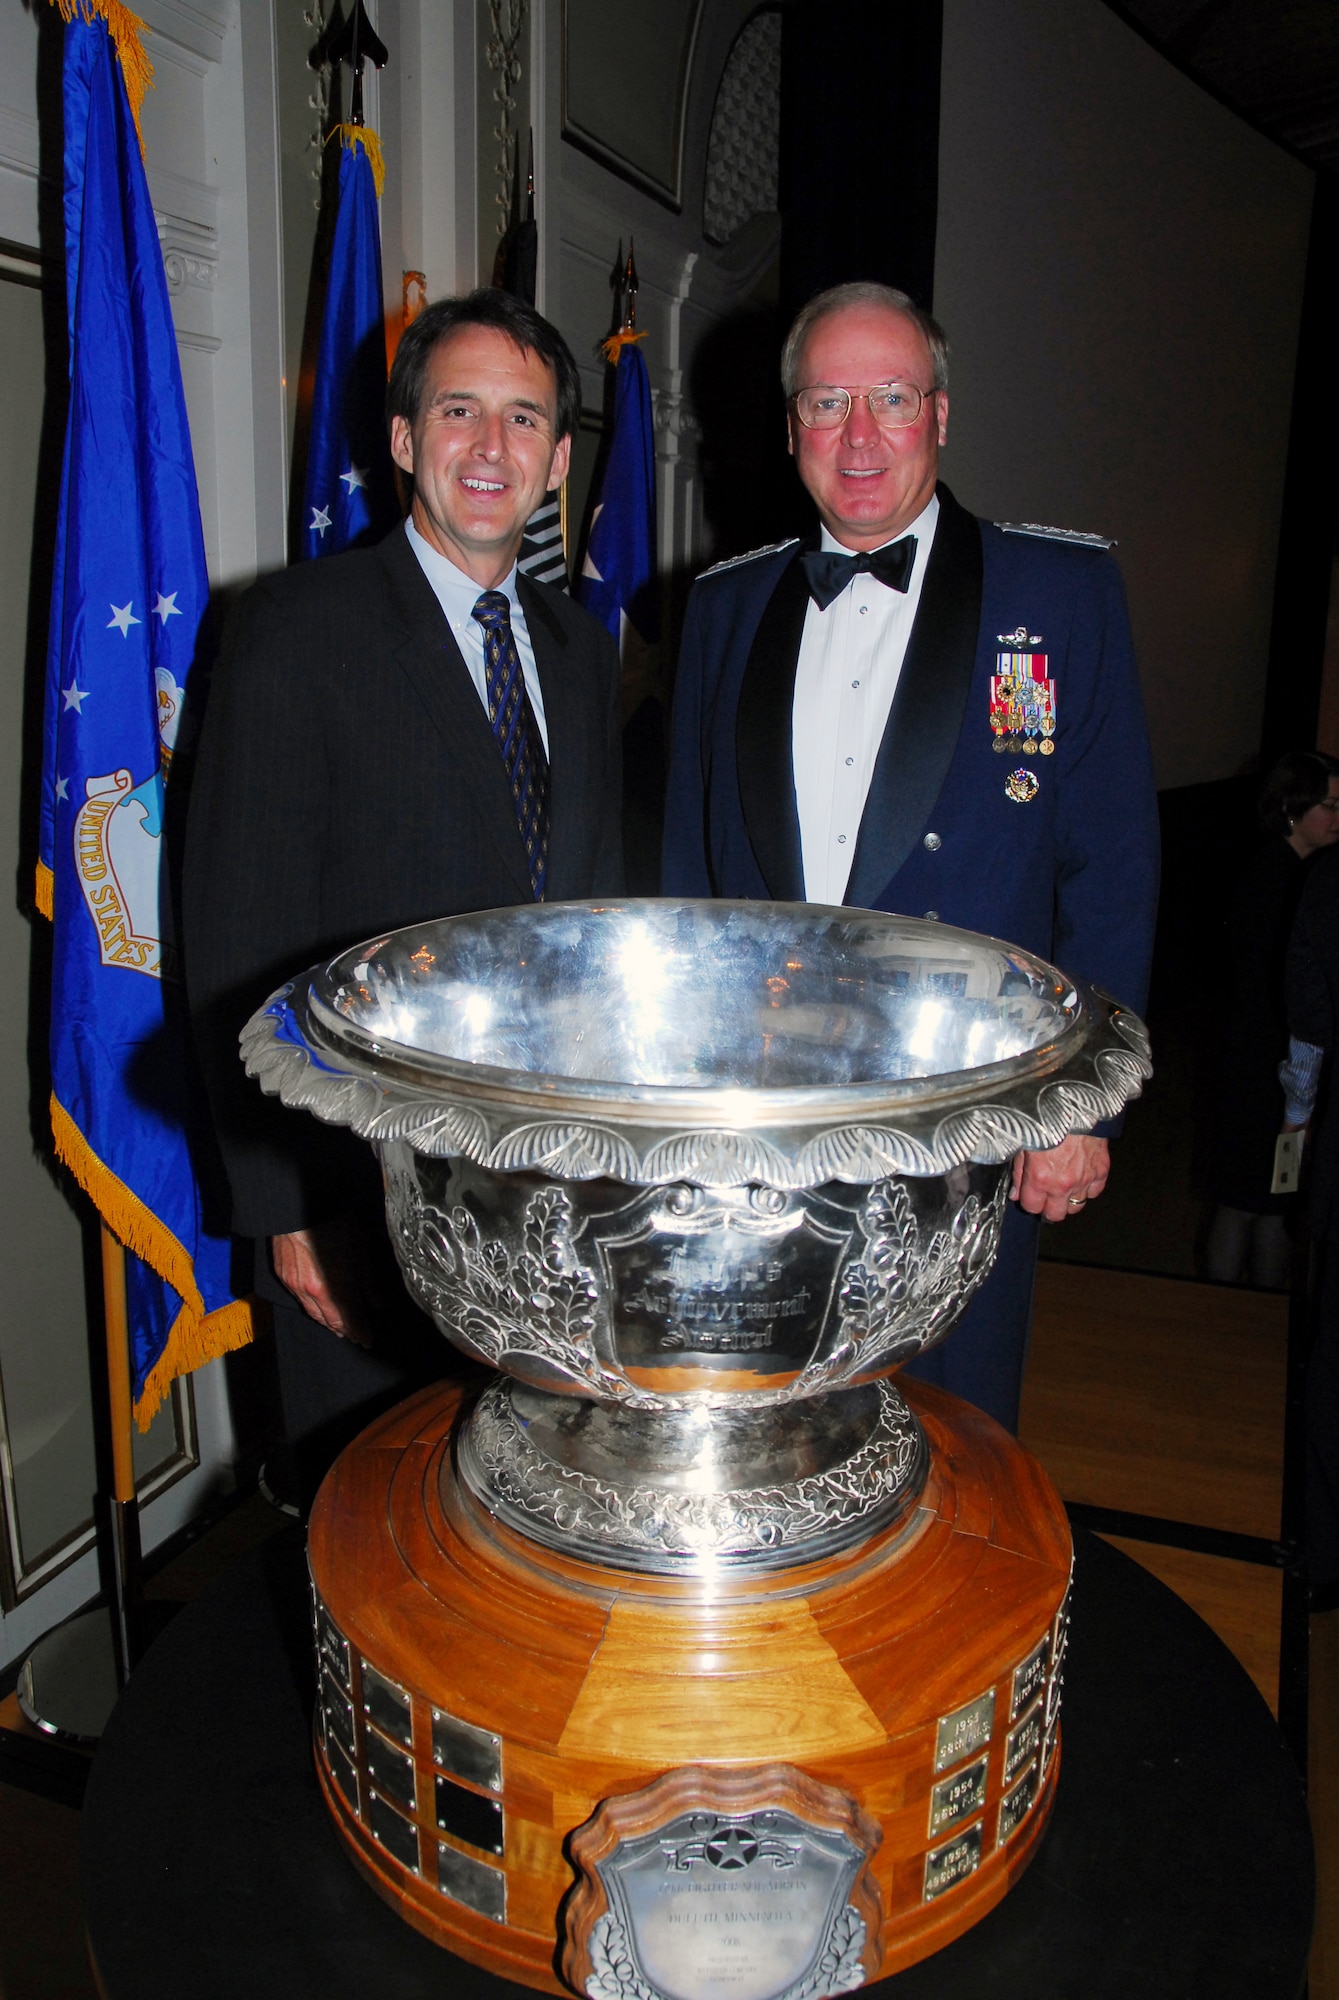 Minnesota Governor Tim Pawlenty (left) poses with U.S. Air Force General Craig R. McKinley-Chief, National Guard Bureau, after the presentation to the 148th Fighter Wing, Duluth, Minn. of the prestigious Raytheon Trophy July 31, 2009 in Duluth, Minn.  The Raytheon Trophy was awarded to the 179th Fighter Squadron of the 148th Fighter Wing as the most outstanding air defense unit in the U.S. Air Force, marking only the fourth time an Air National Guard unit received this award since its inception in 1953.  (U.S. Air Force photo by Tech. Sgt. Brett R. Ewald)